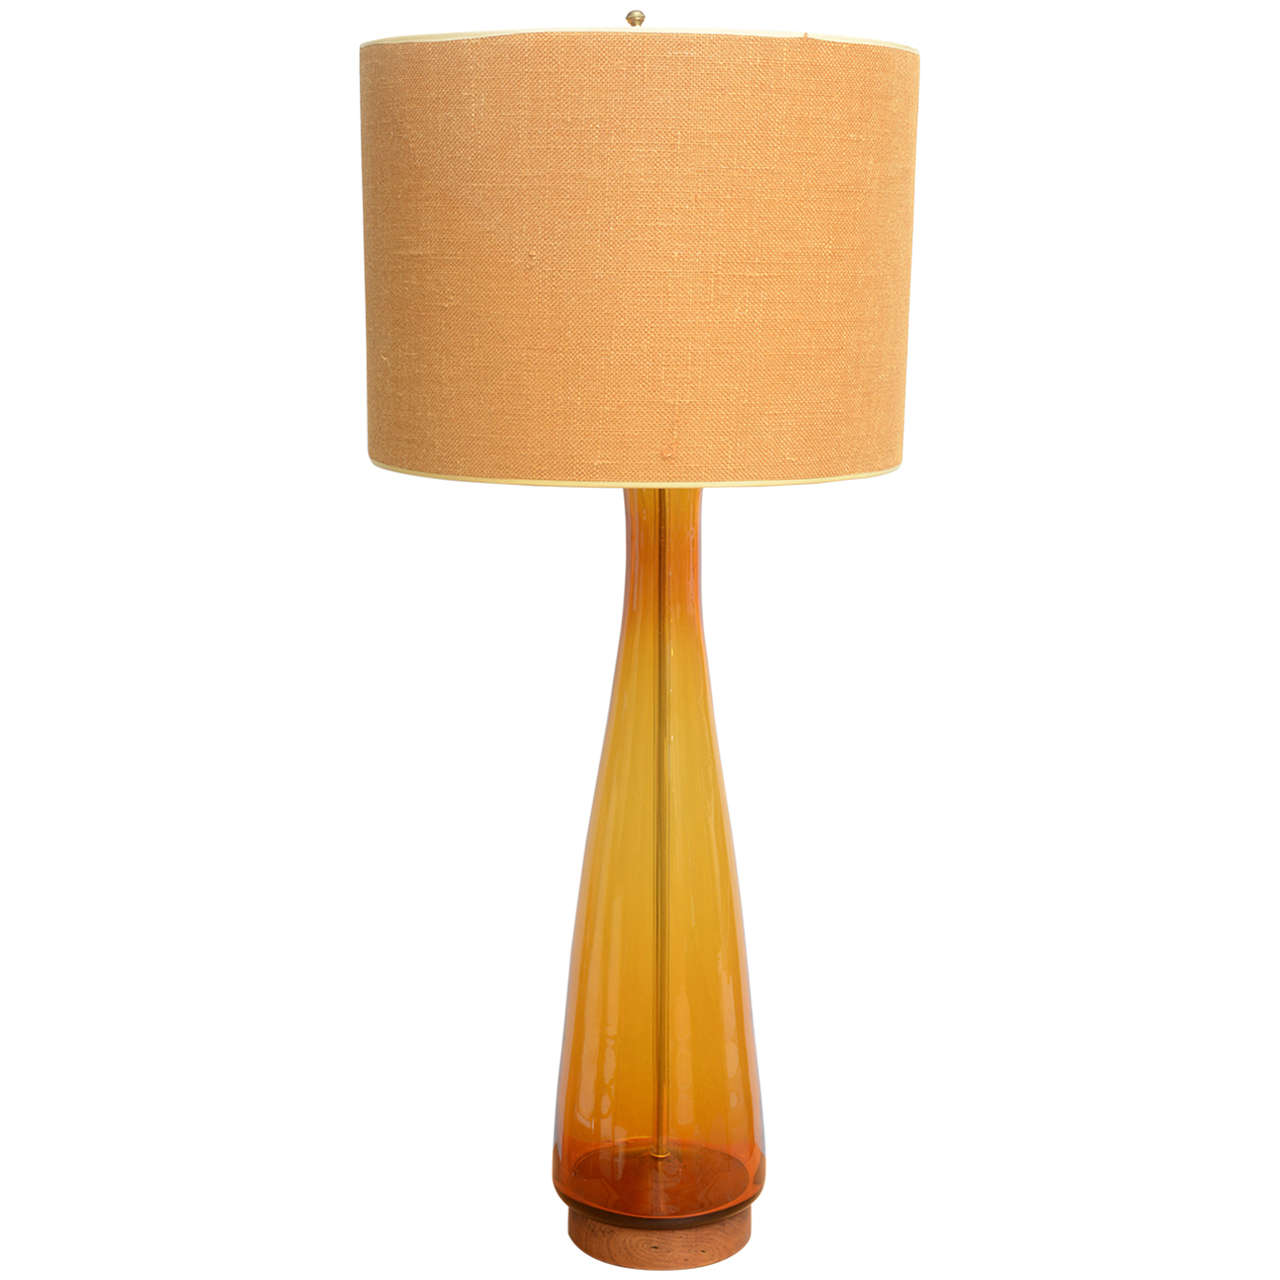 Blanco Murano Lamp, 1960s Italy For Sale